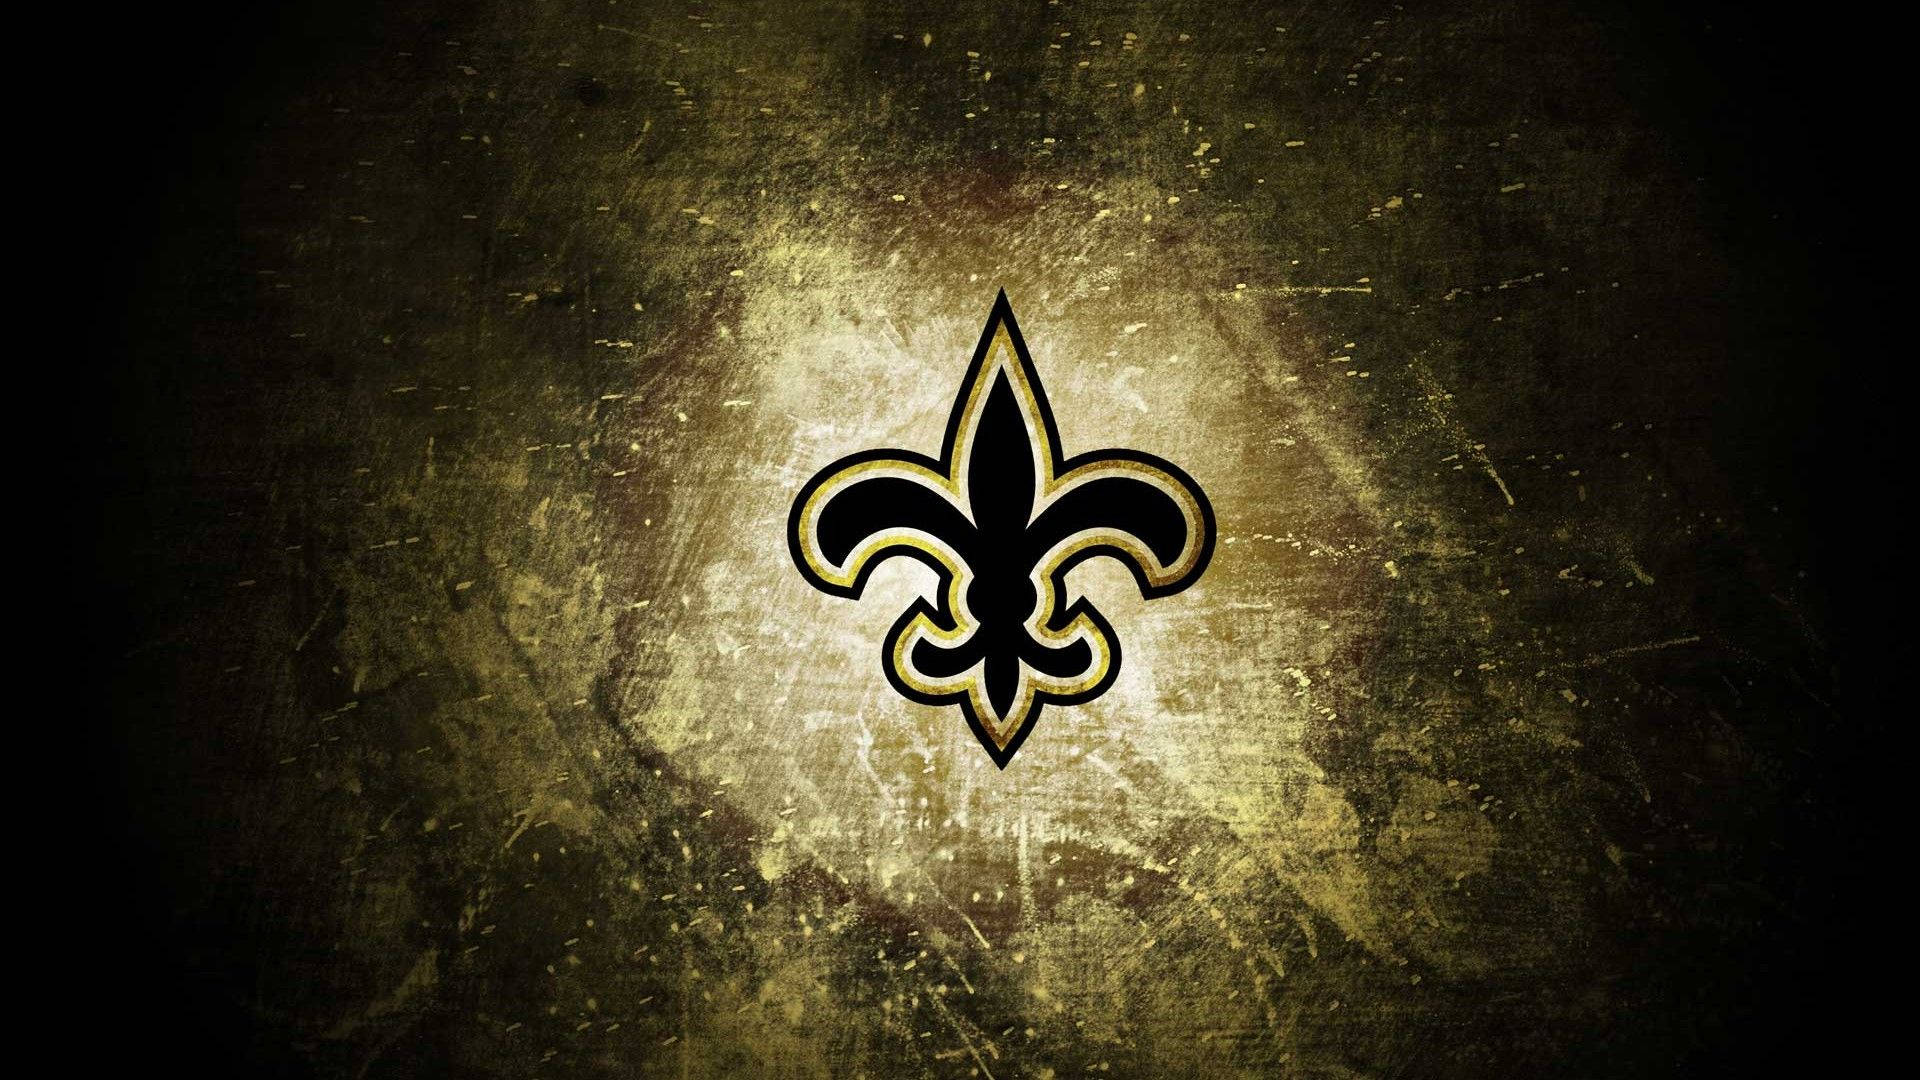 1920X1080 Saints Wallpaper and Background